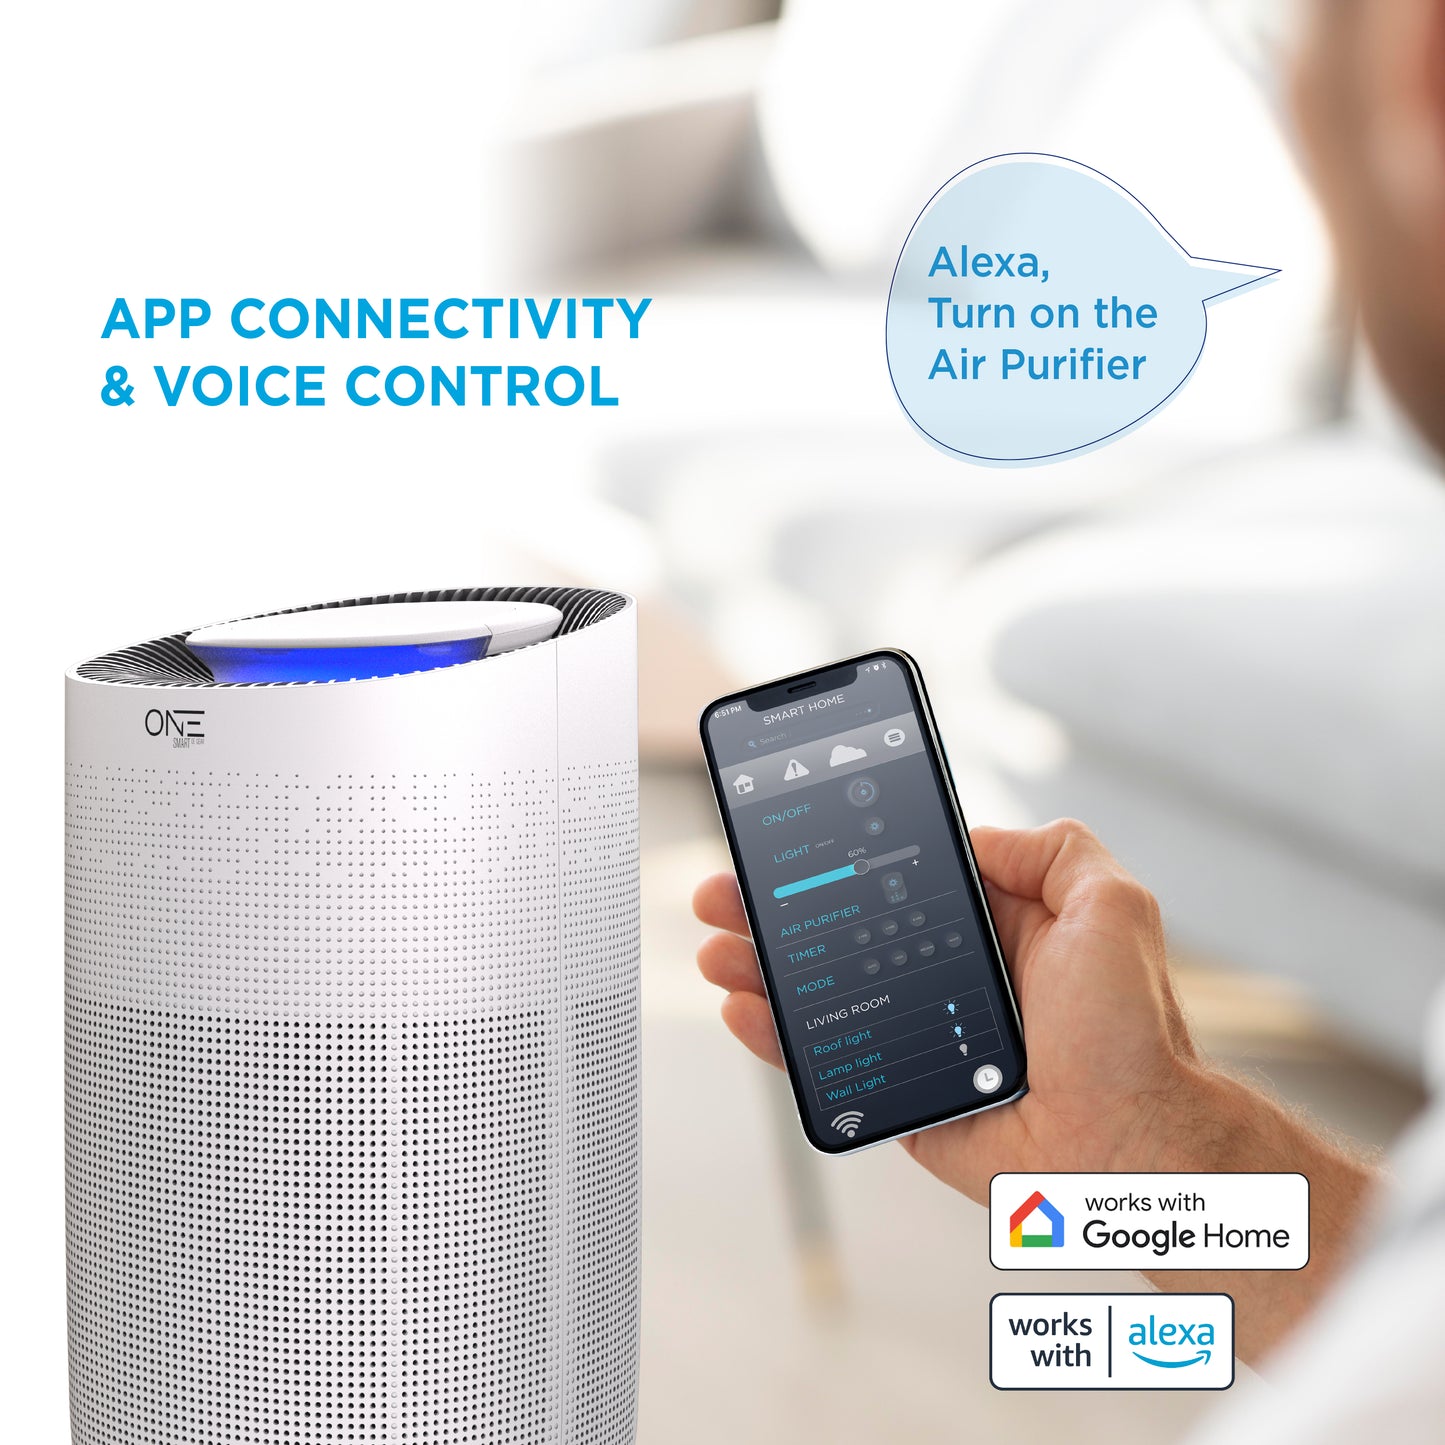 ONE Products NEO Smart Air Purifier with WiFi (OSAP01)